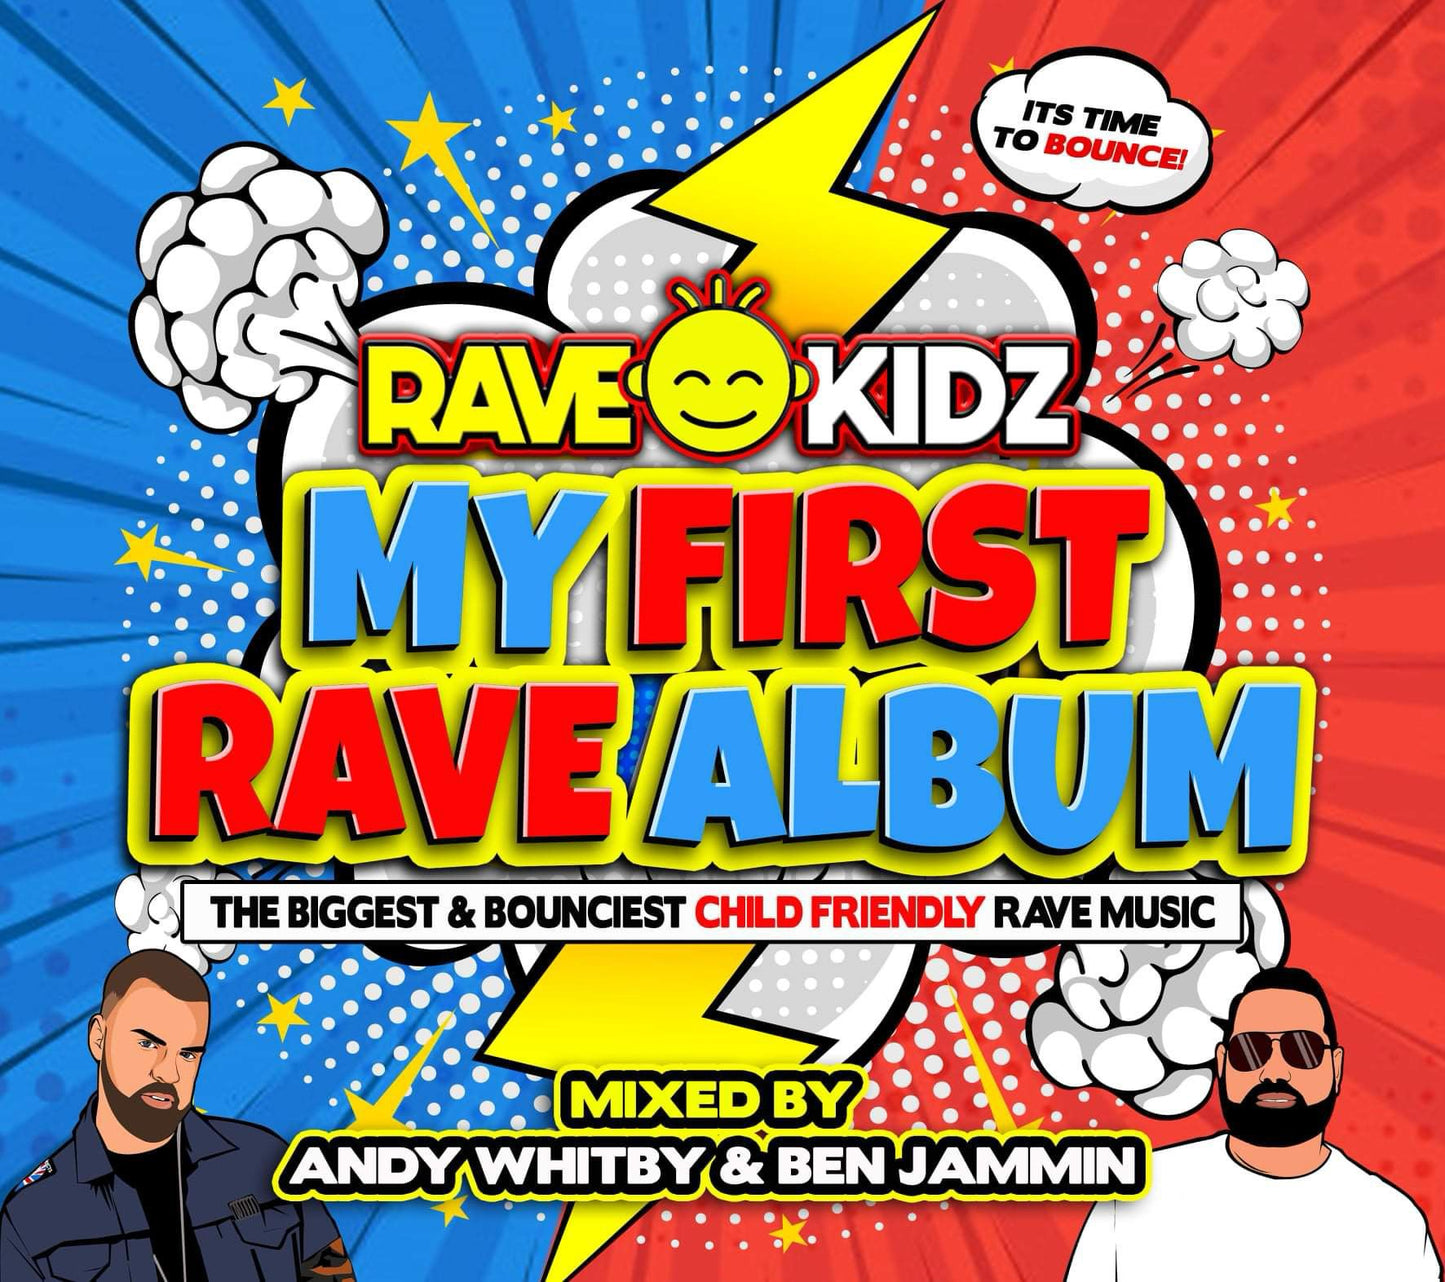 Rave Kidz Album 1 mixed by Andy Whitby & Ben Jammin (2CD)